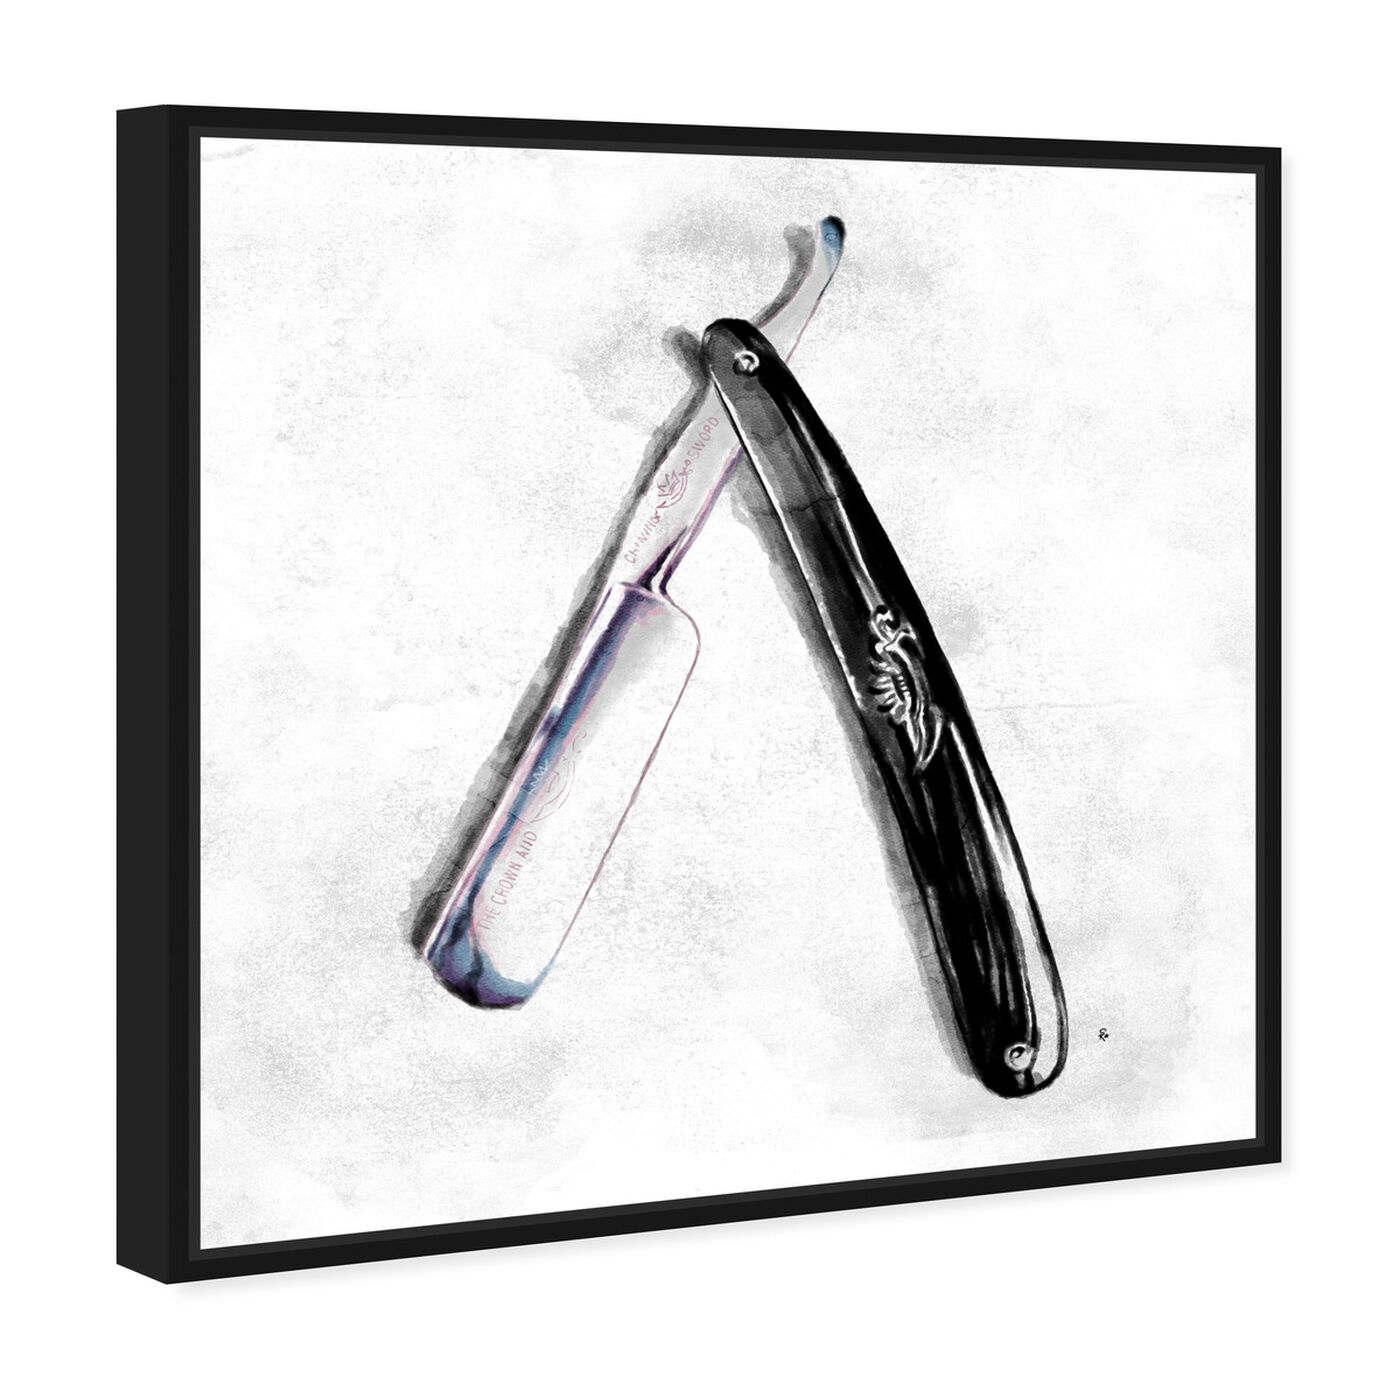 Angled view of Straight Razor 2 featuring bath and laundry and barber art.